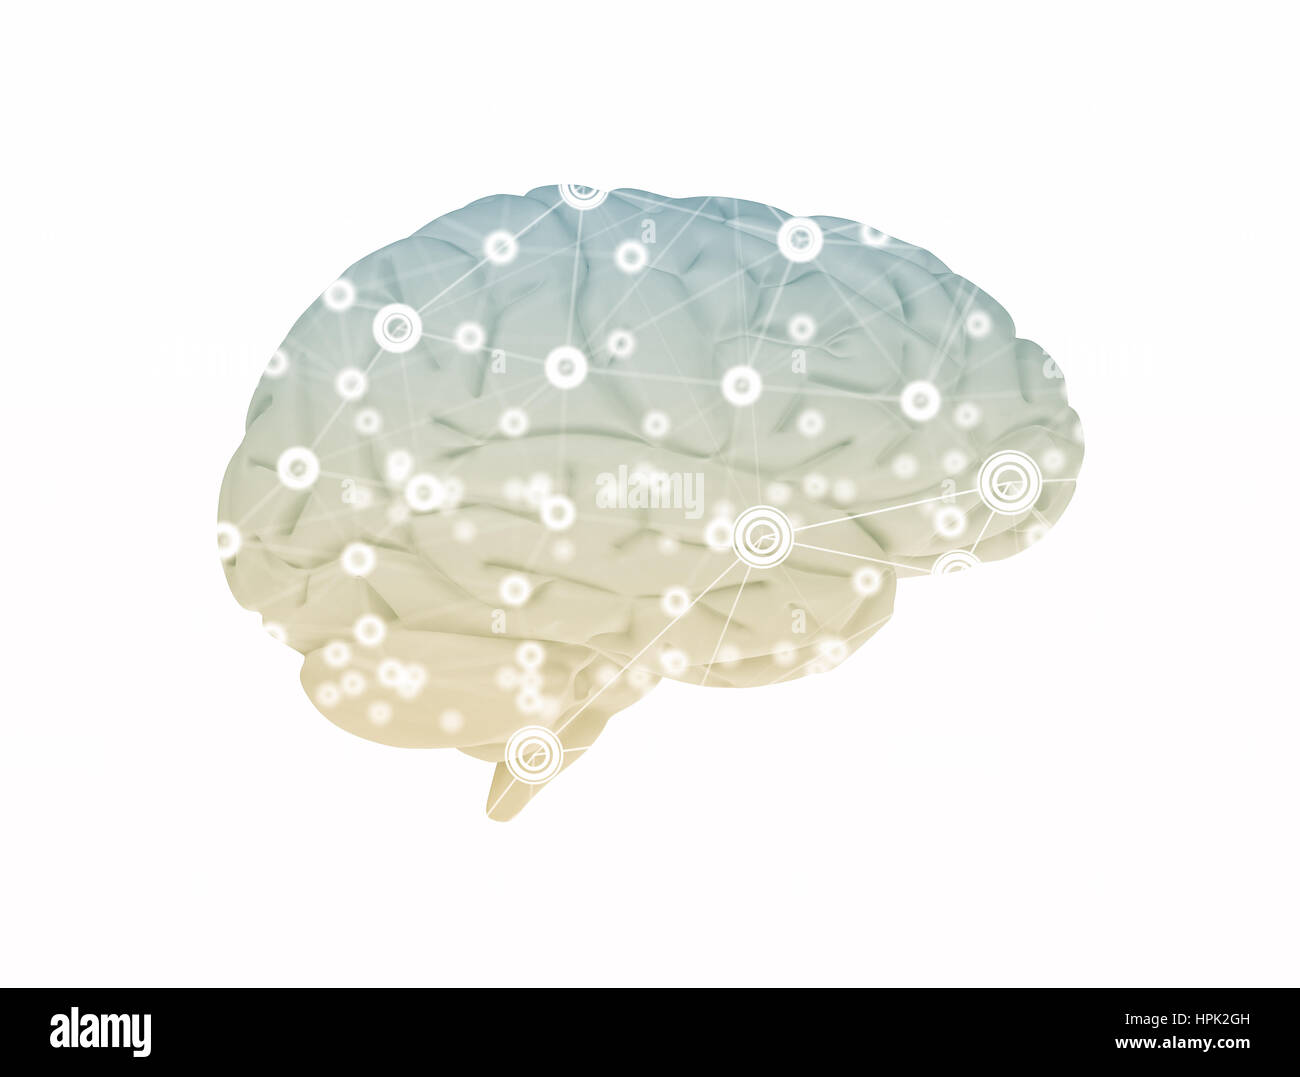 Brain and network pattern 3d render isolated on white background Stock Photo